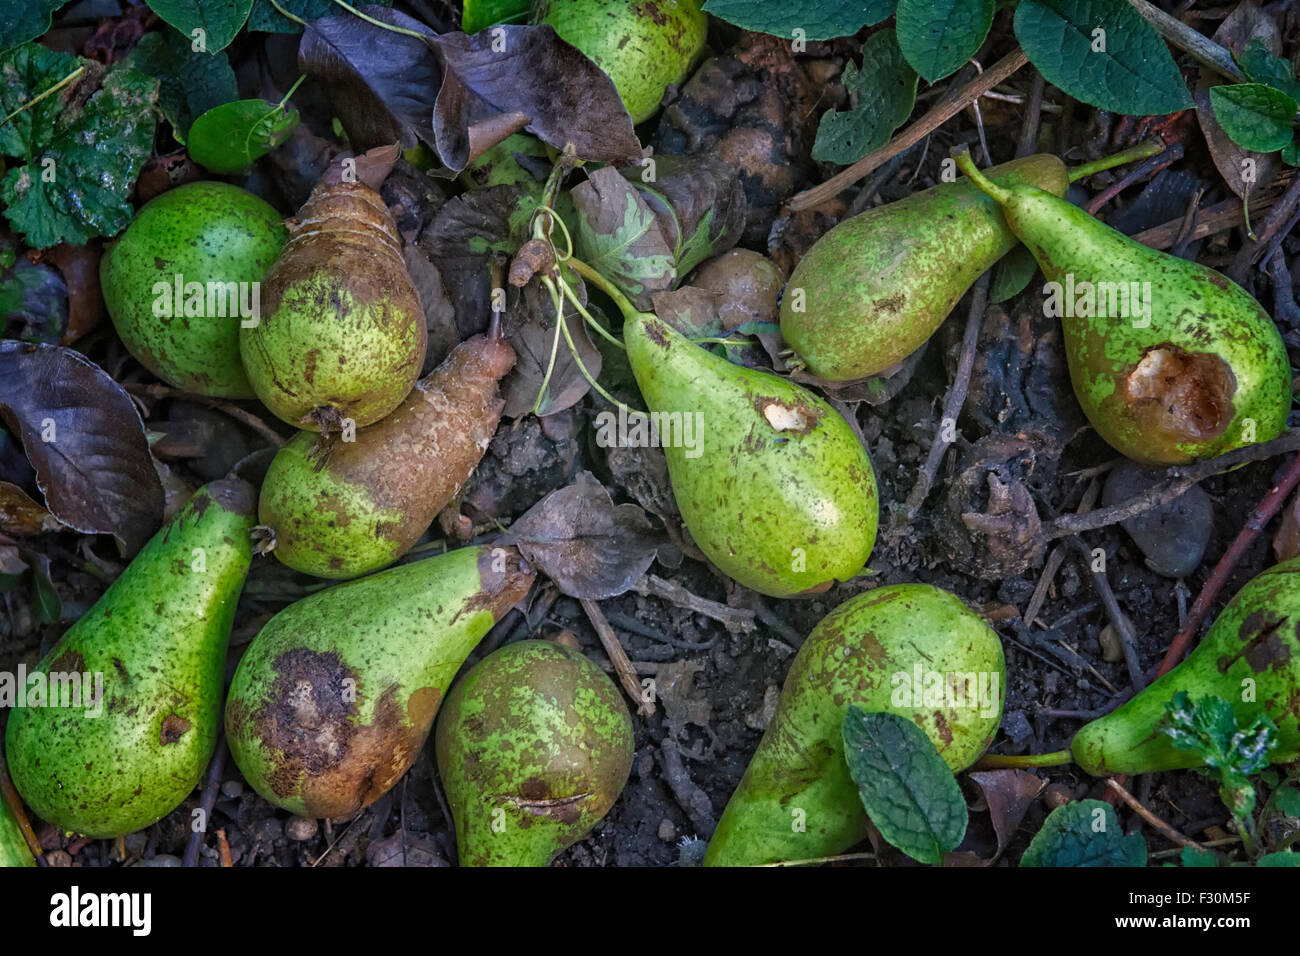 Pear fruits fallen from a tree and rotting on the ground Stock Photo